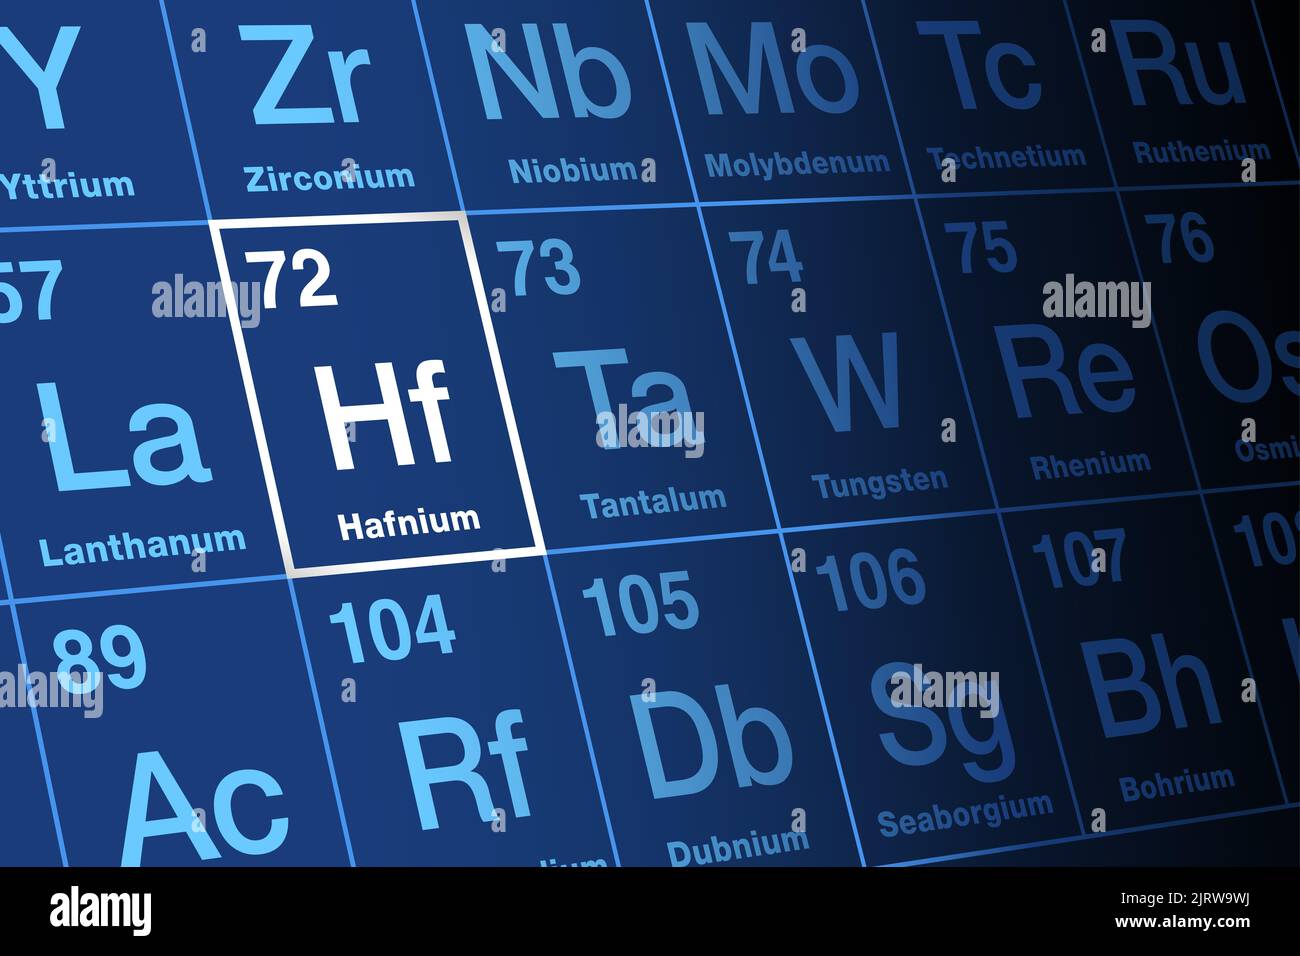 Hafnium, on periodic table. Transition metal and rare earth element, with symbol Hf, from Latin name hafnia, for Copenhagen. Atomic number 72. Stock Photo